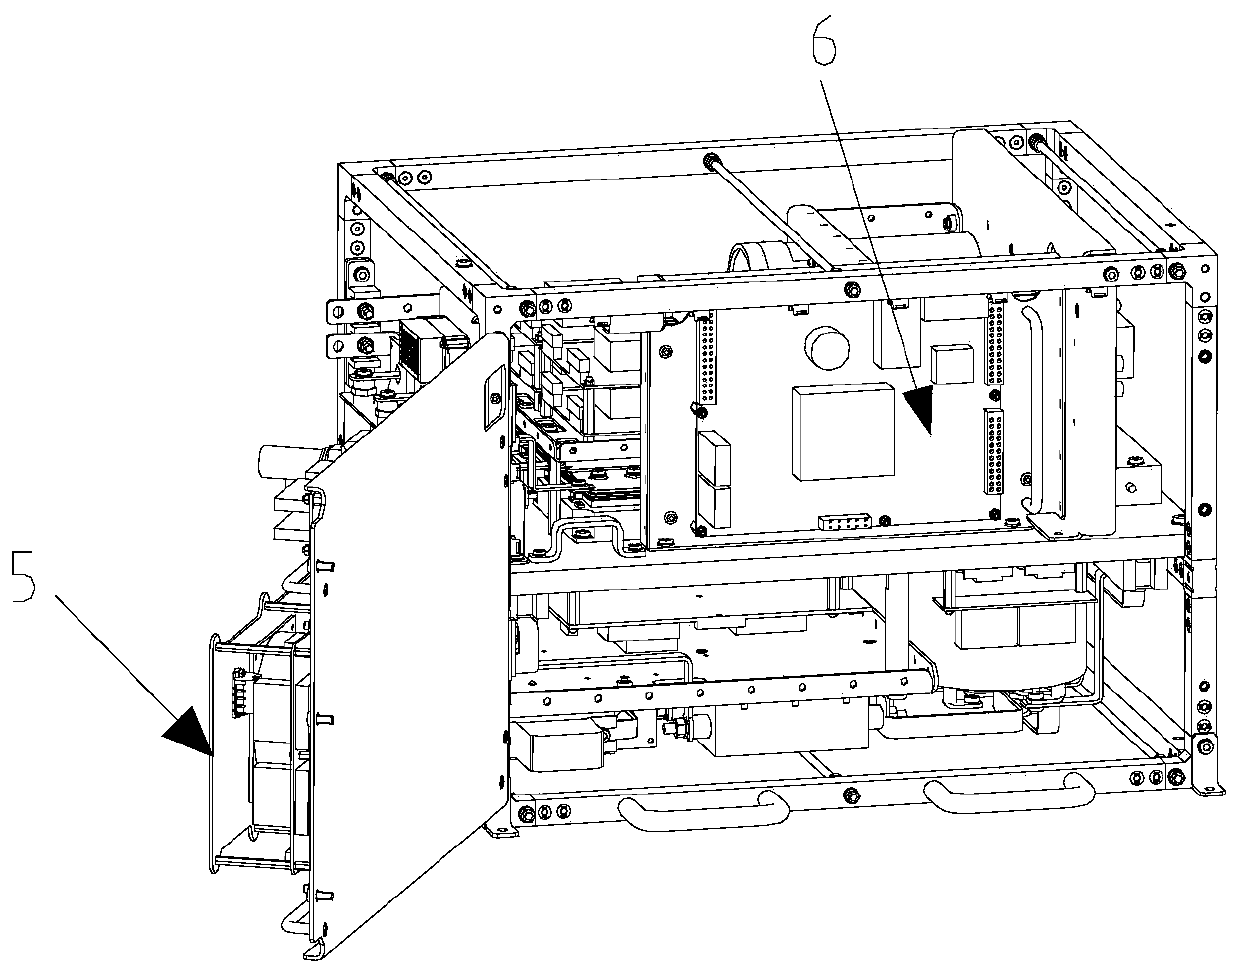 Power module of auxiliary power system